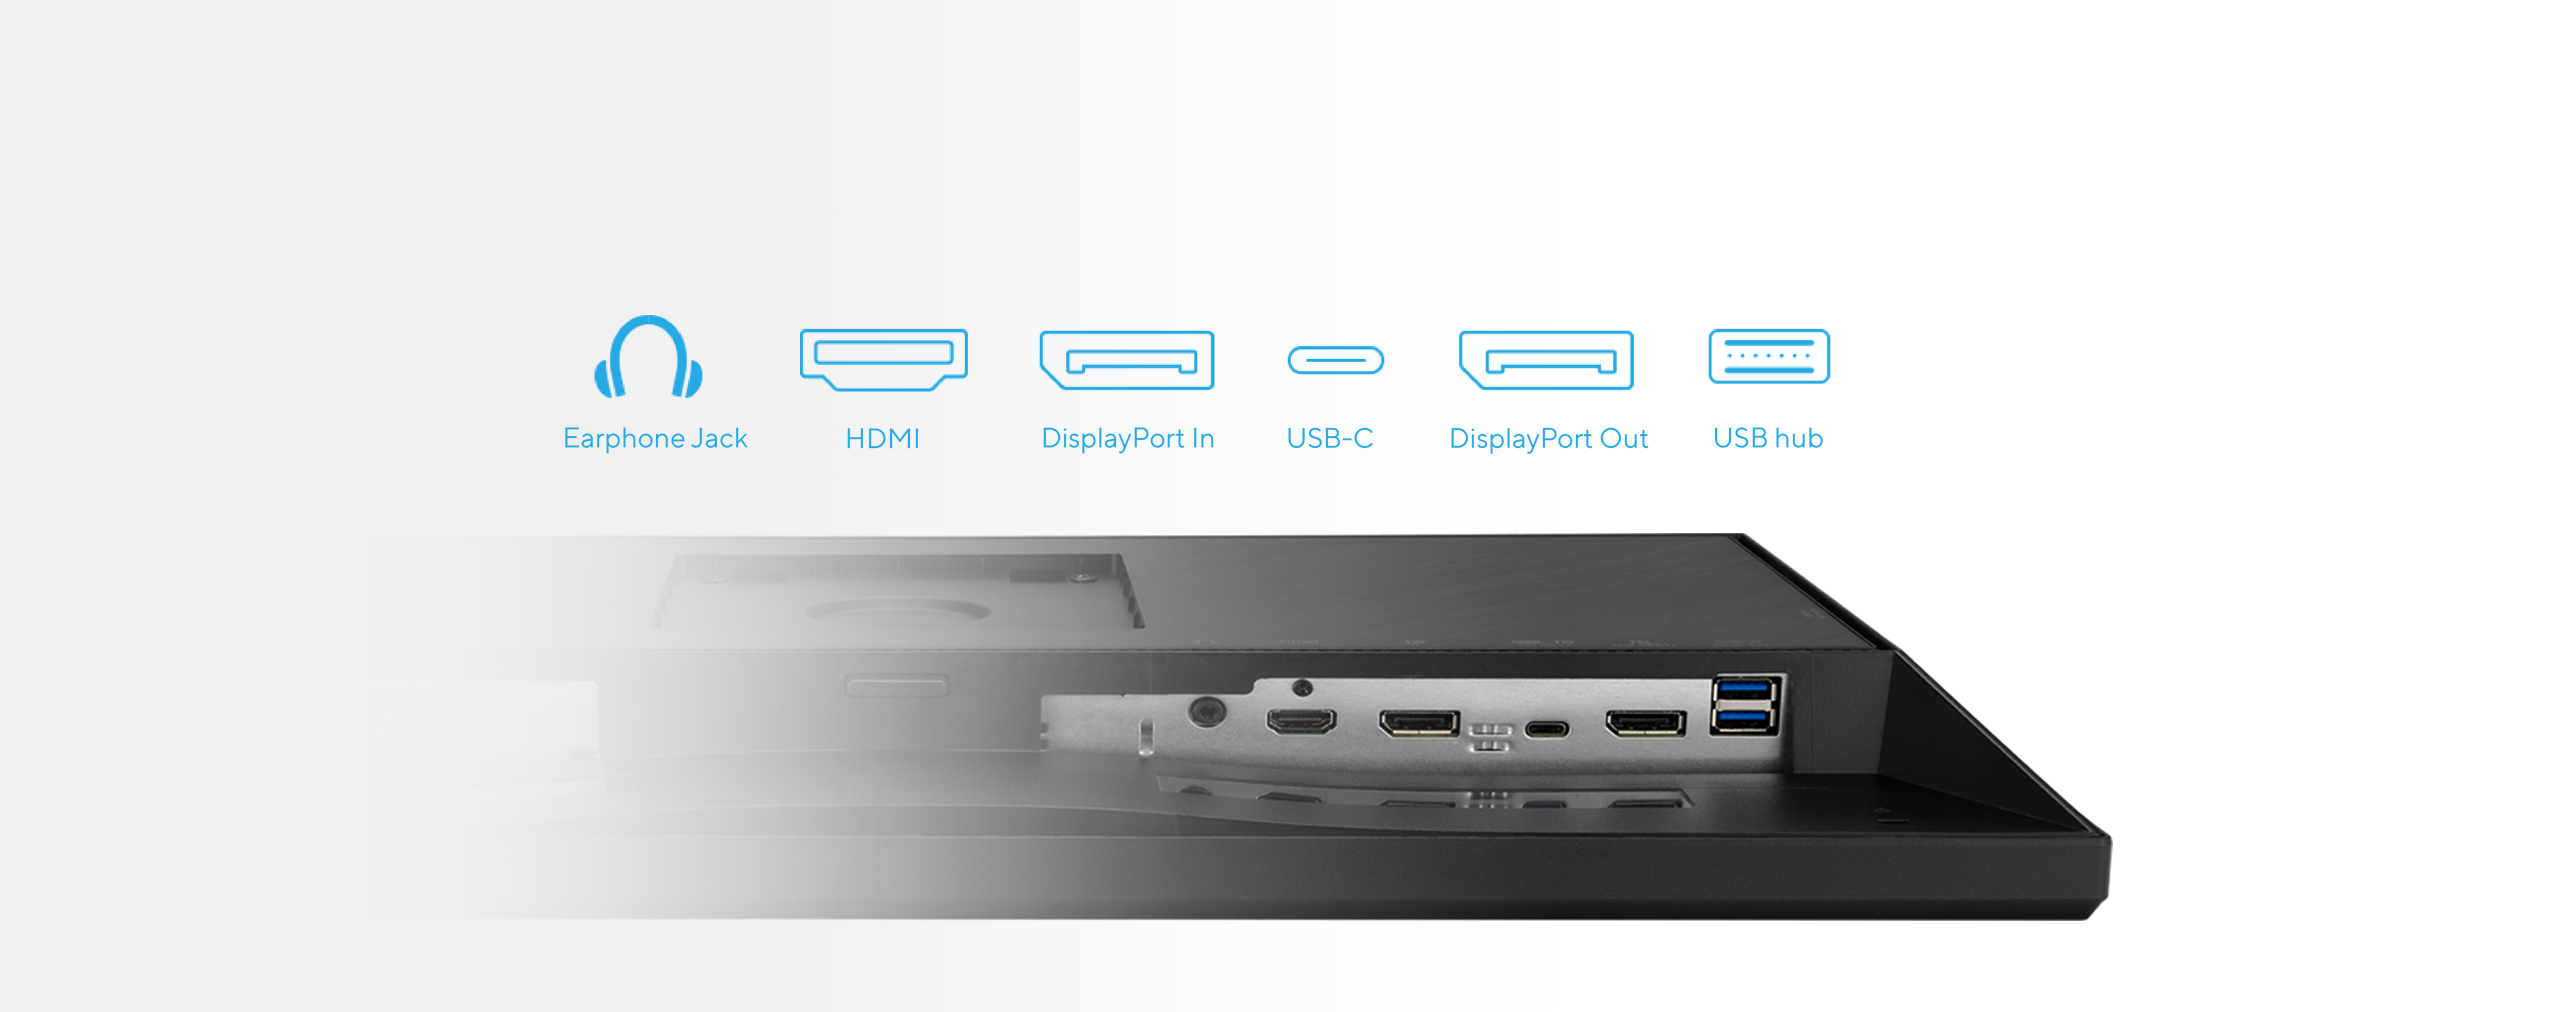 BE24ECSBT features a host of connectivity options that include HDMI, DisplayPort, DVI-D, D-sub and two USB 3.0 ports.